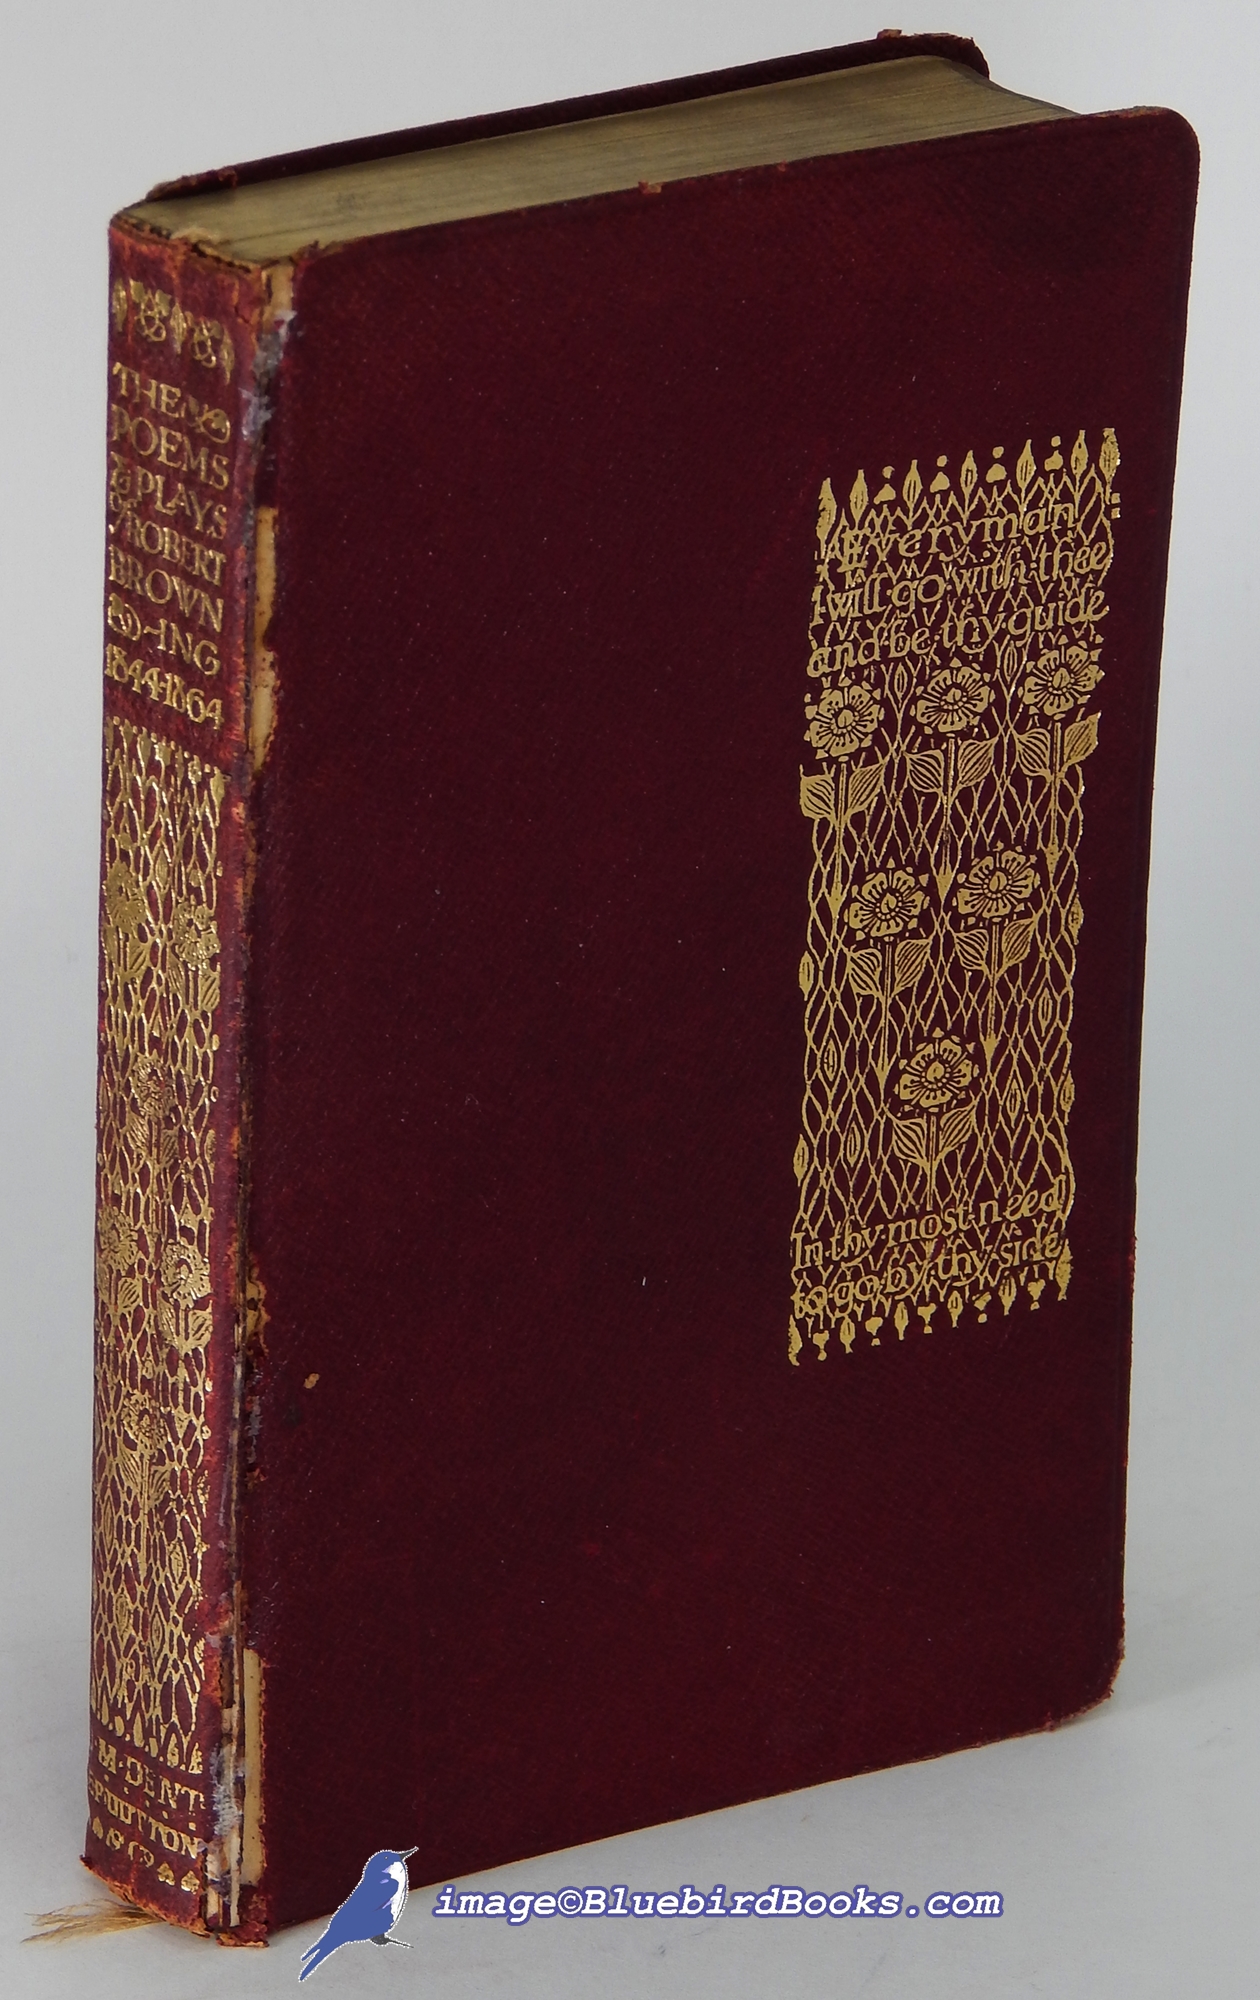 BROWNING, ROBERT - The Poems & Plays of Robert Browning, 1844-1864: Volume II (Everyman's Library Flex Leatherette Style, el #42)